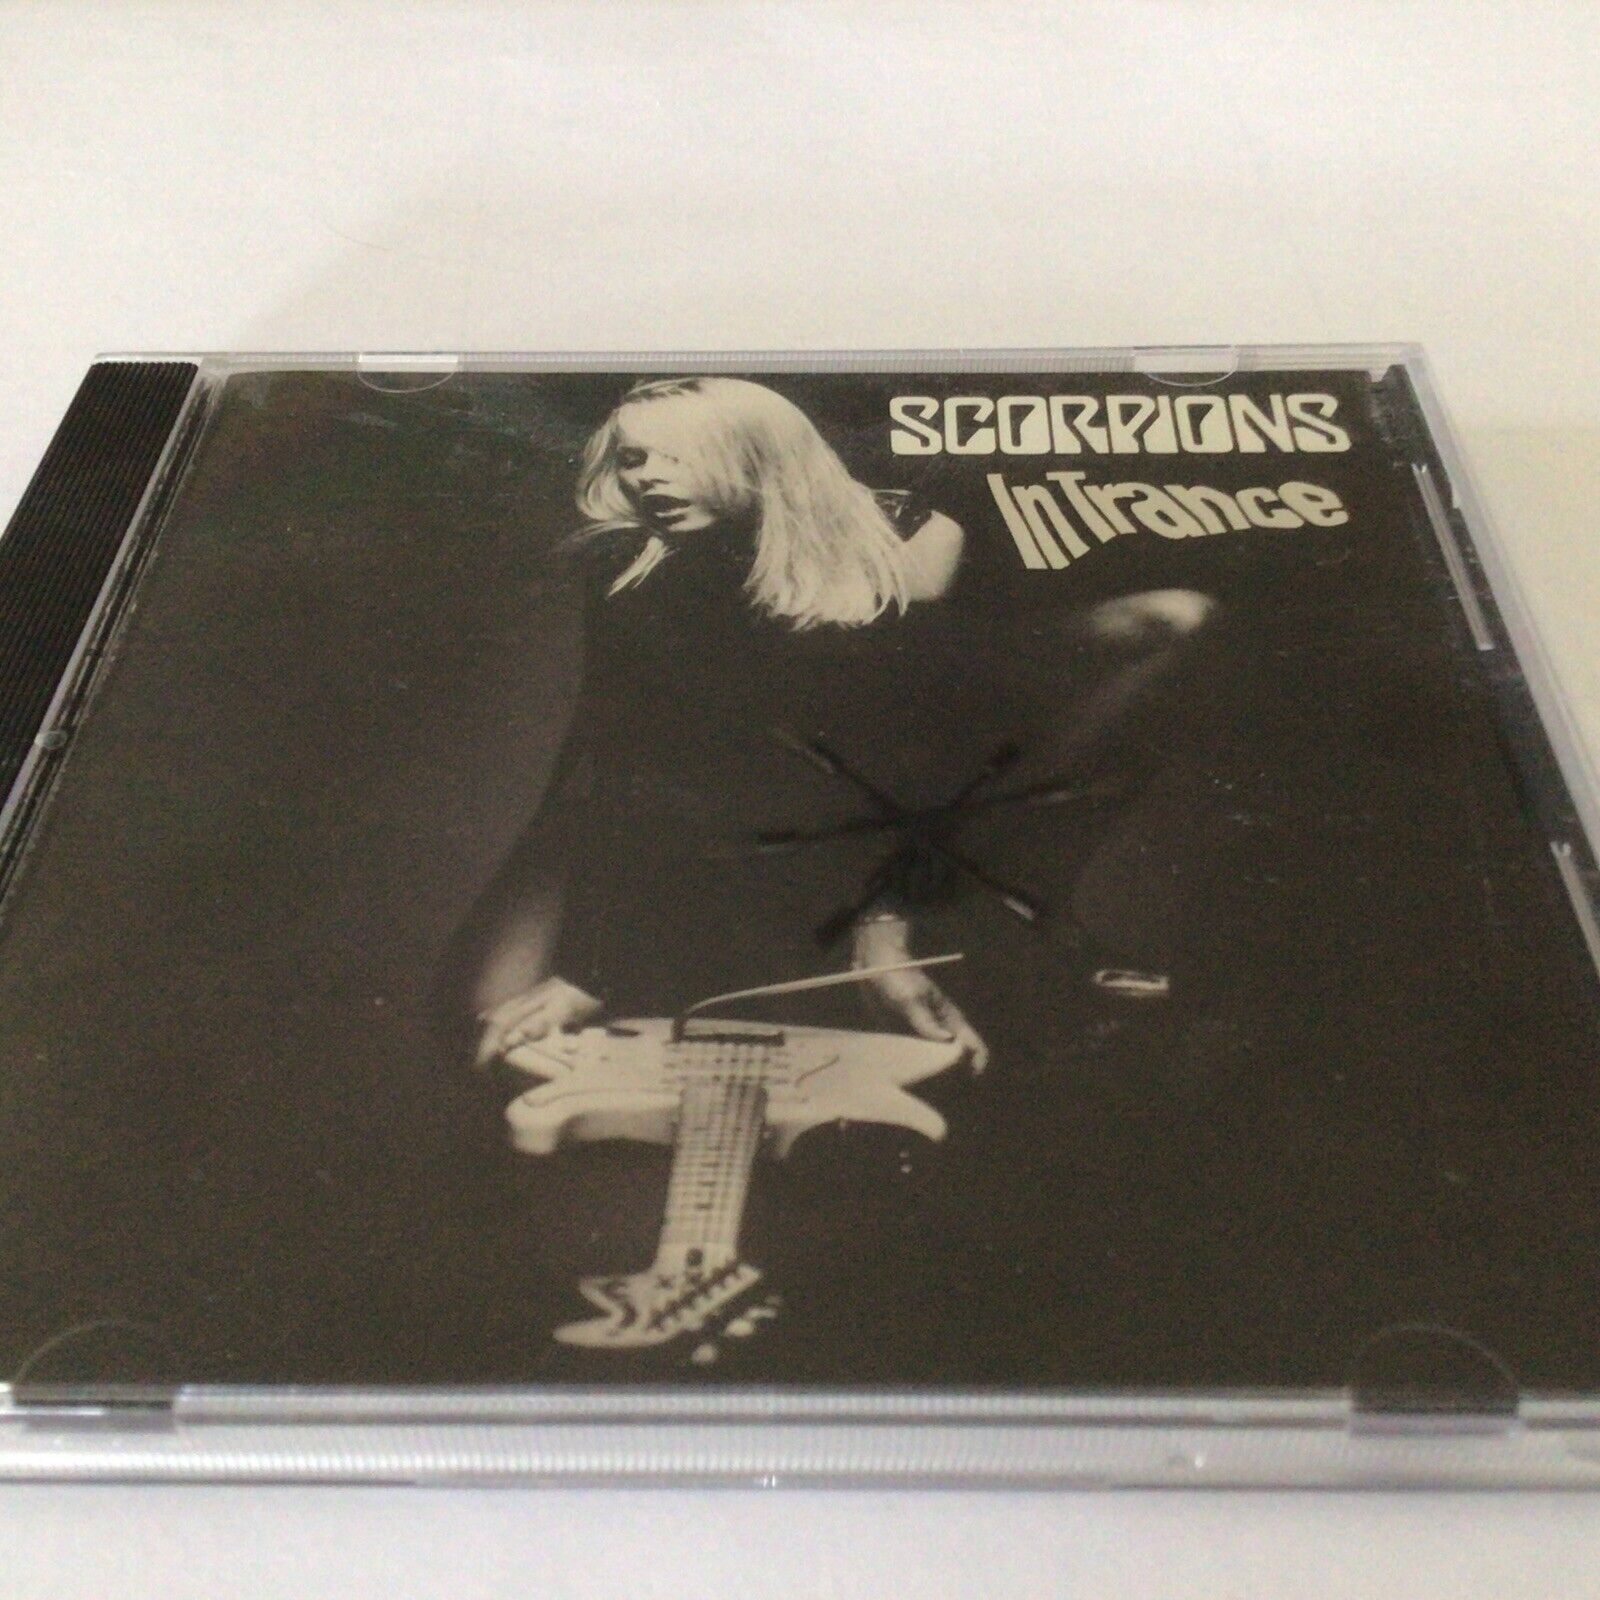 In Trance by Scorpions (CD, Aug-1991, RCA) Tested